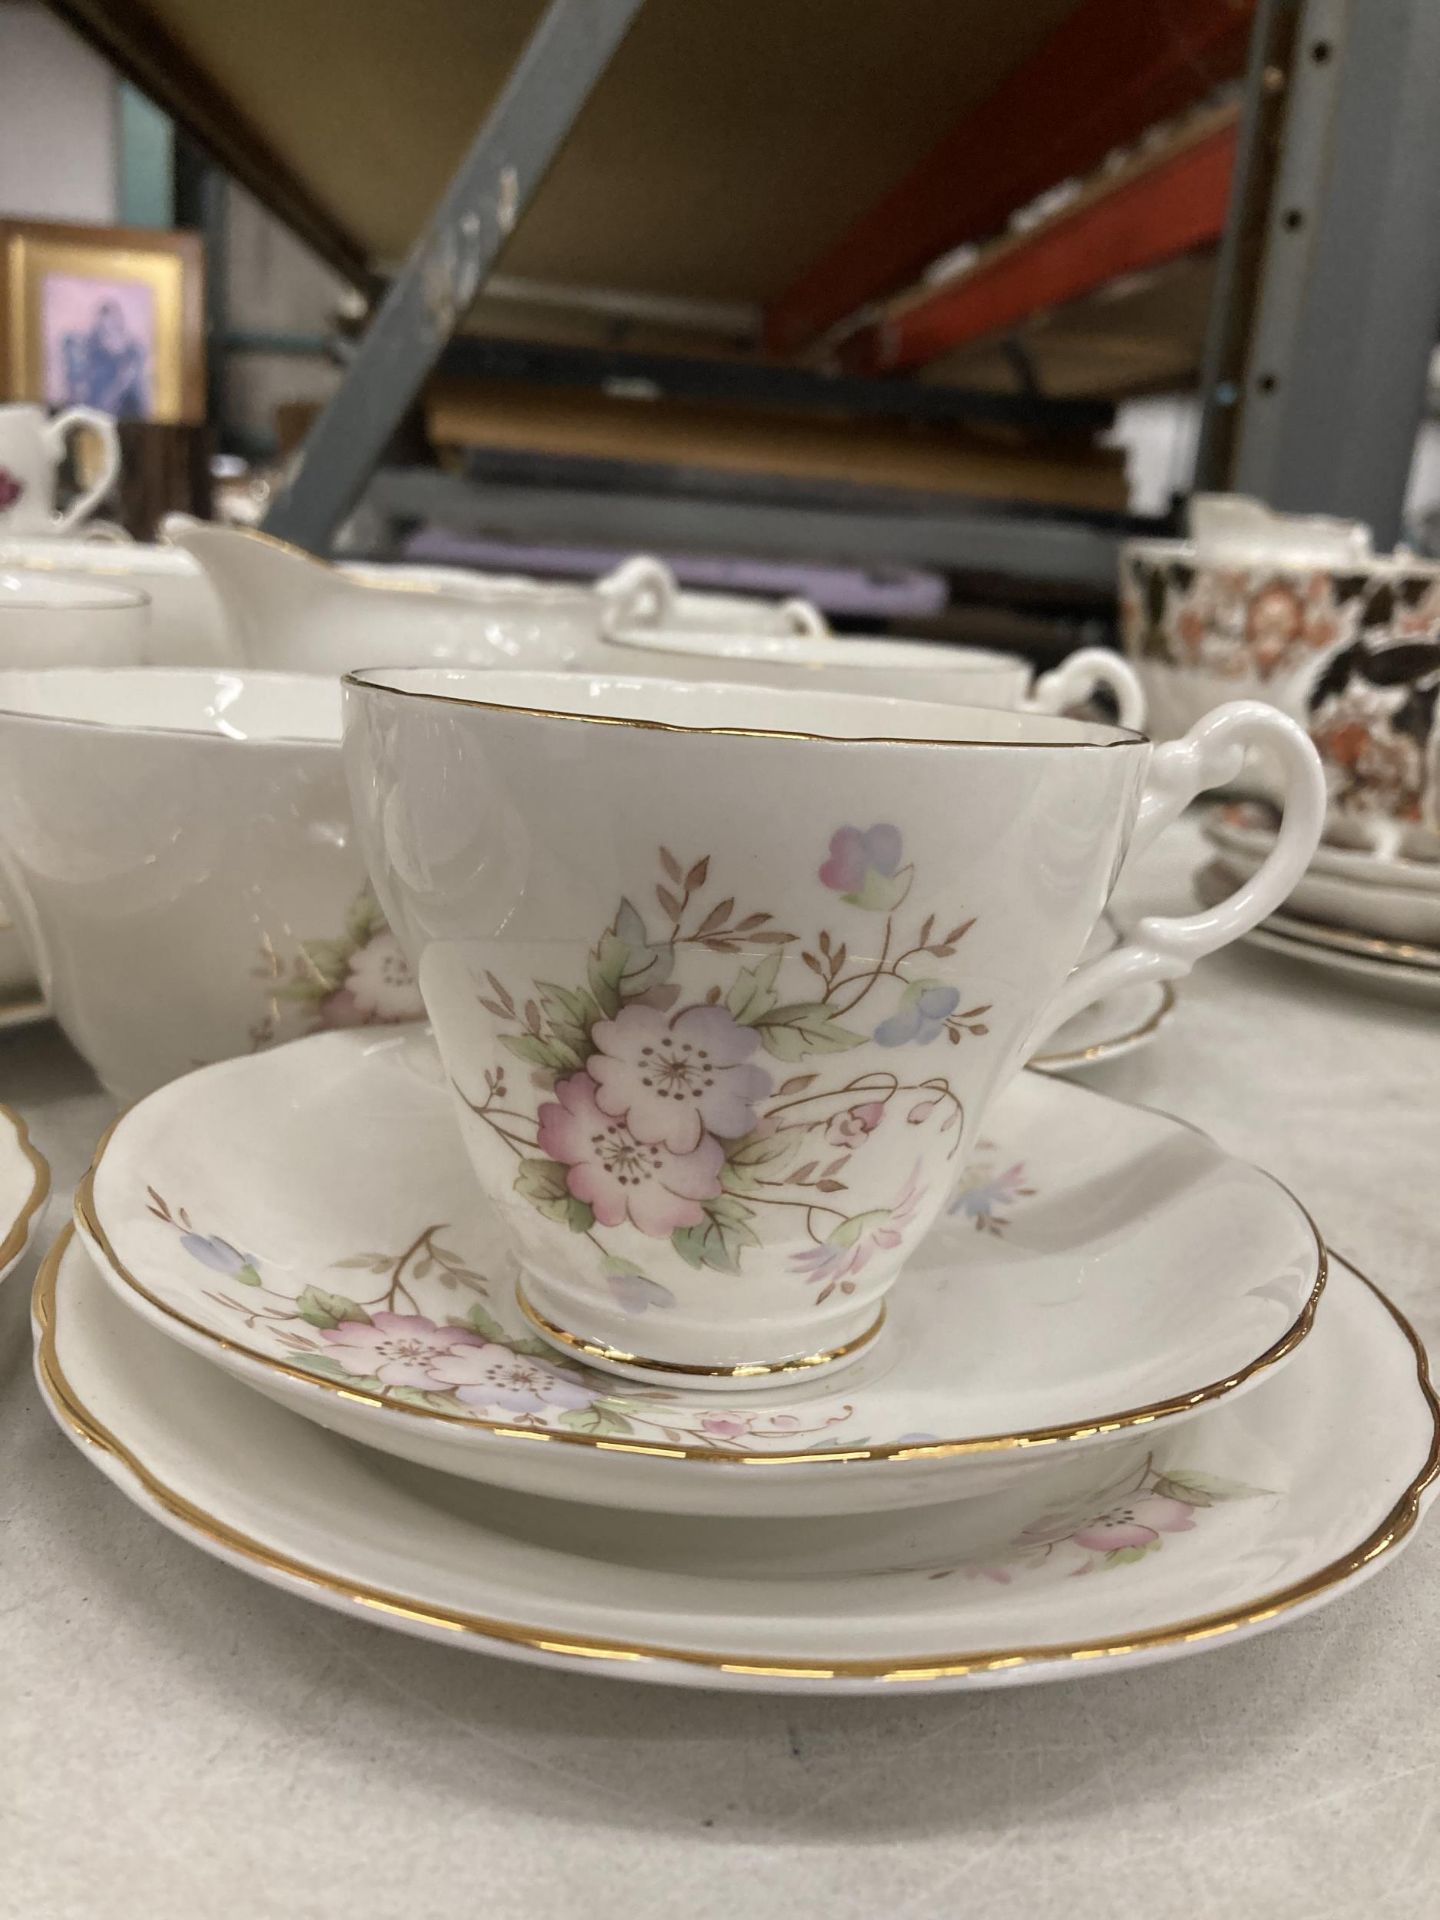 TWO PART CHINA TEASETS, MONTFORT AND RICHMOND, TO INCLUDE A CAKE PLATE, PLATES, CUPS, SAUCERS, - Image 2 of 4